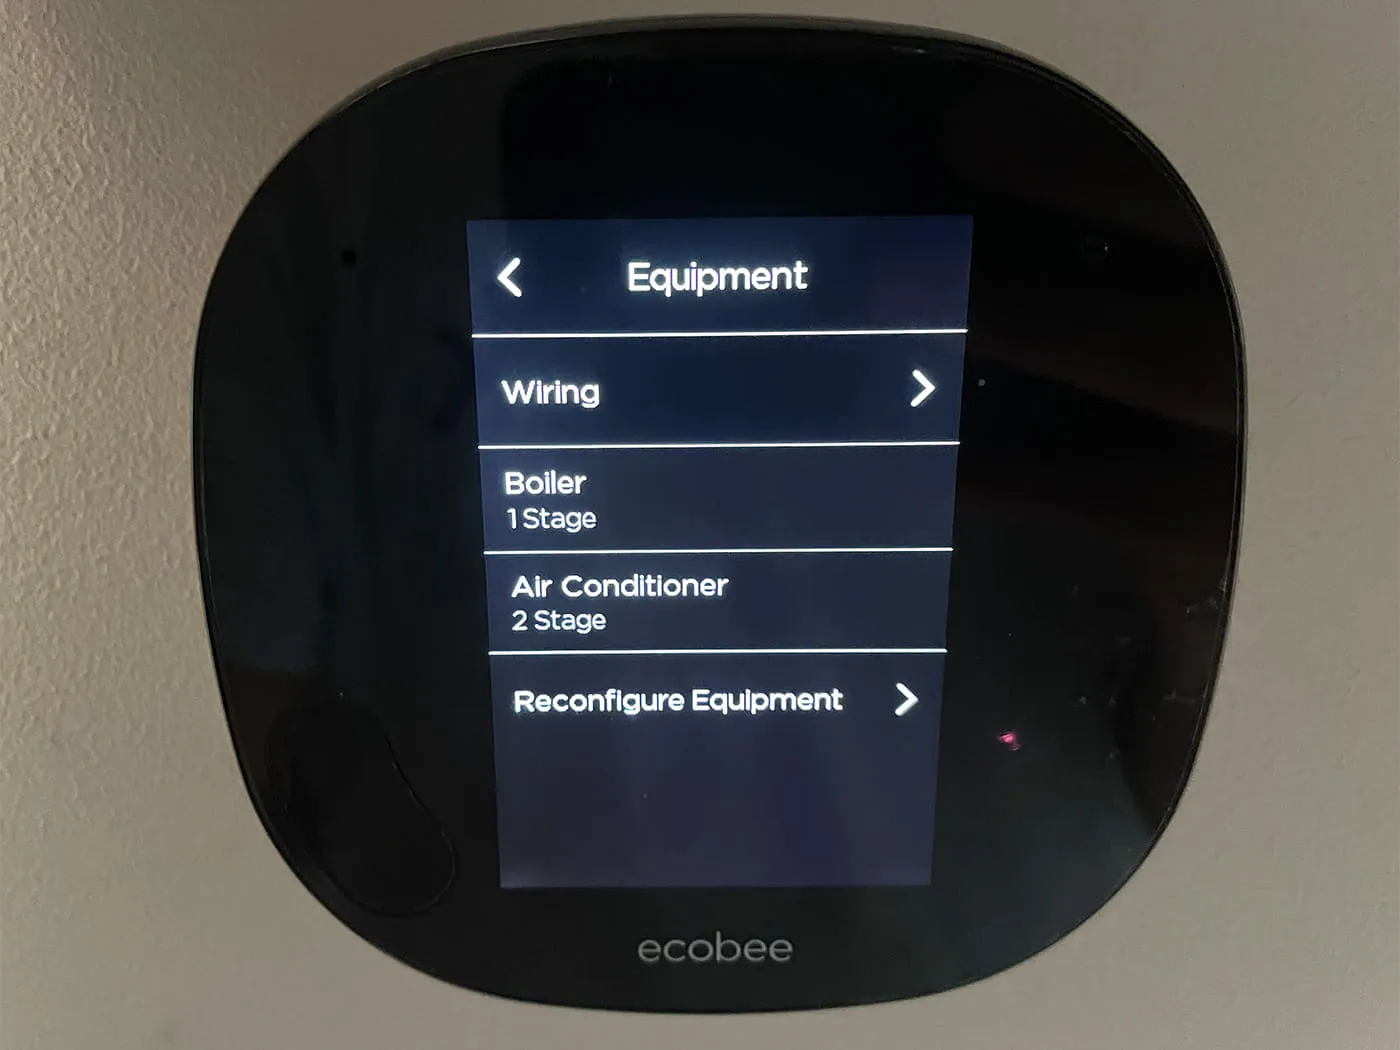 Ecobee thermostat Equipment settings screen